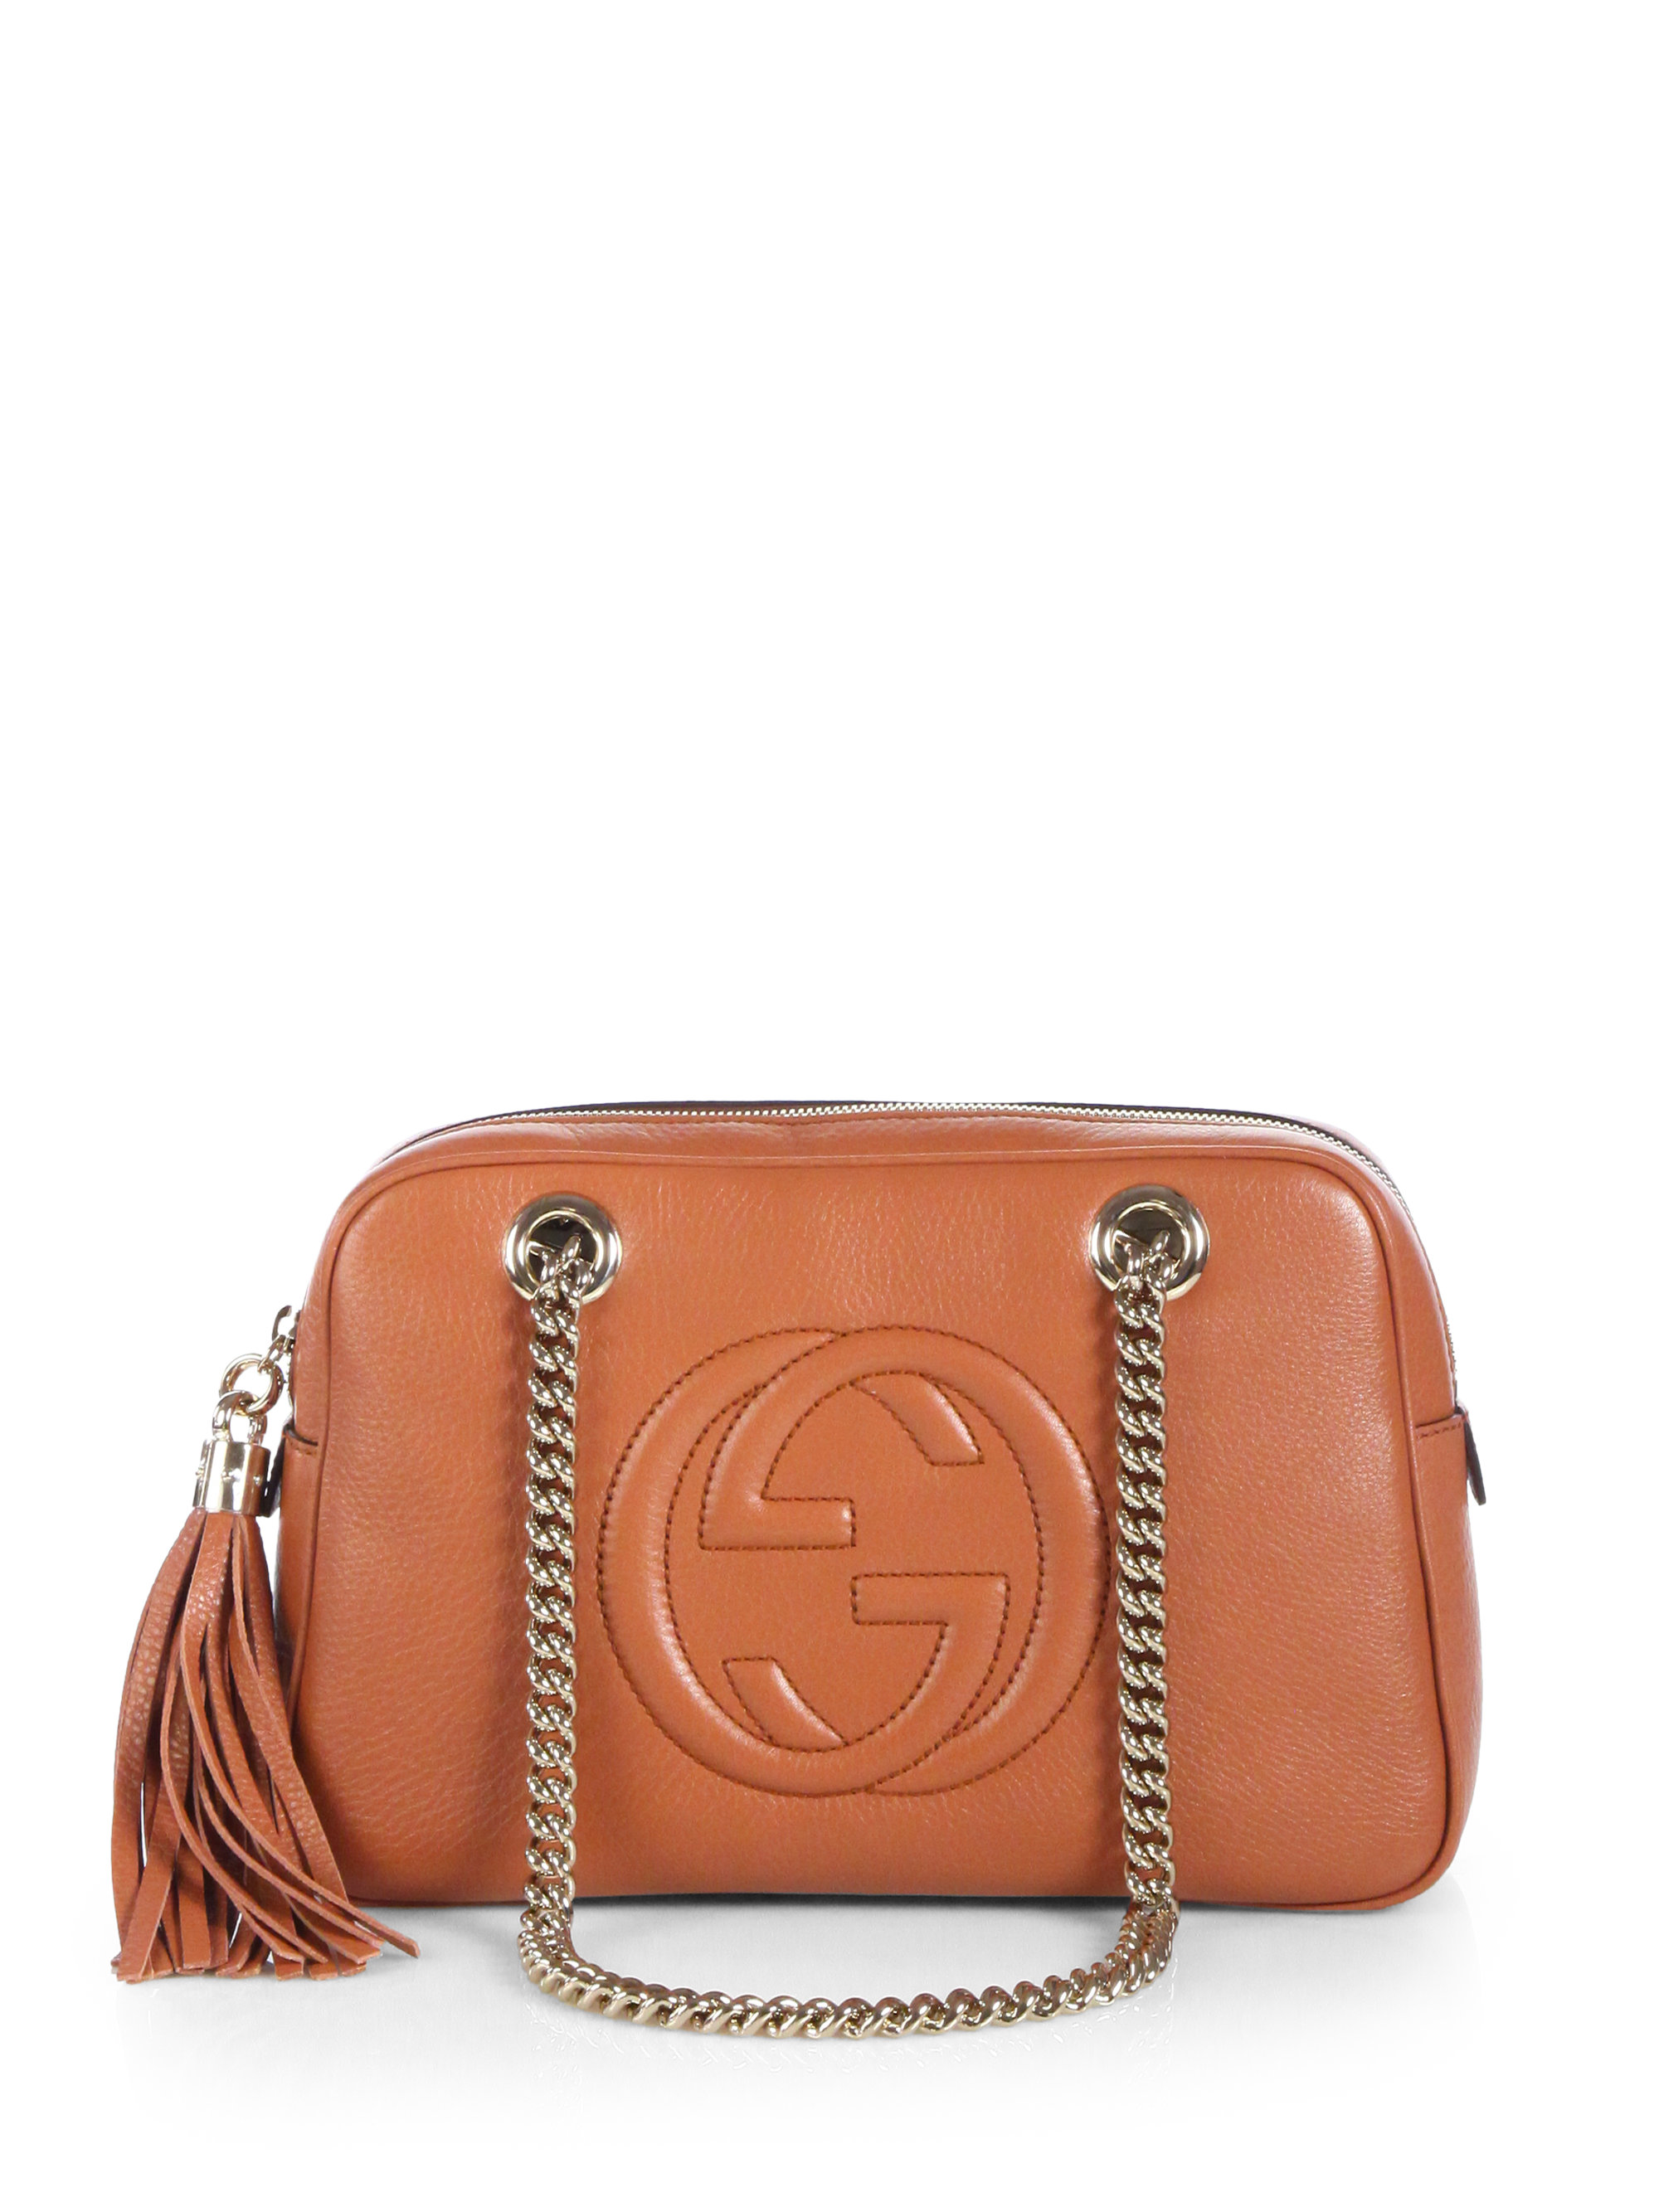 Lyst - Gucci Soho Leather Shoulder Bag in Brown